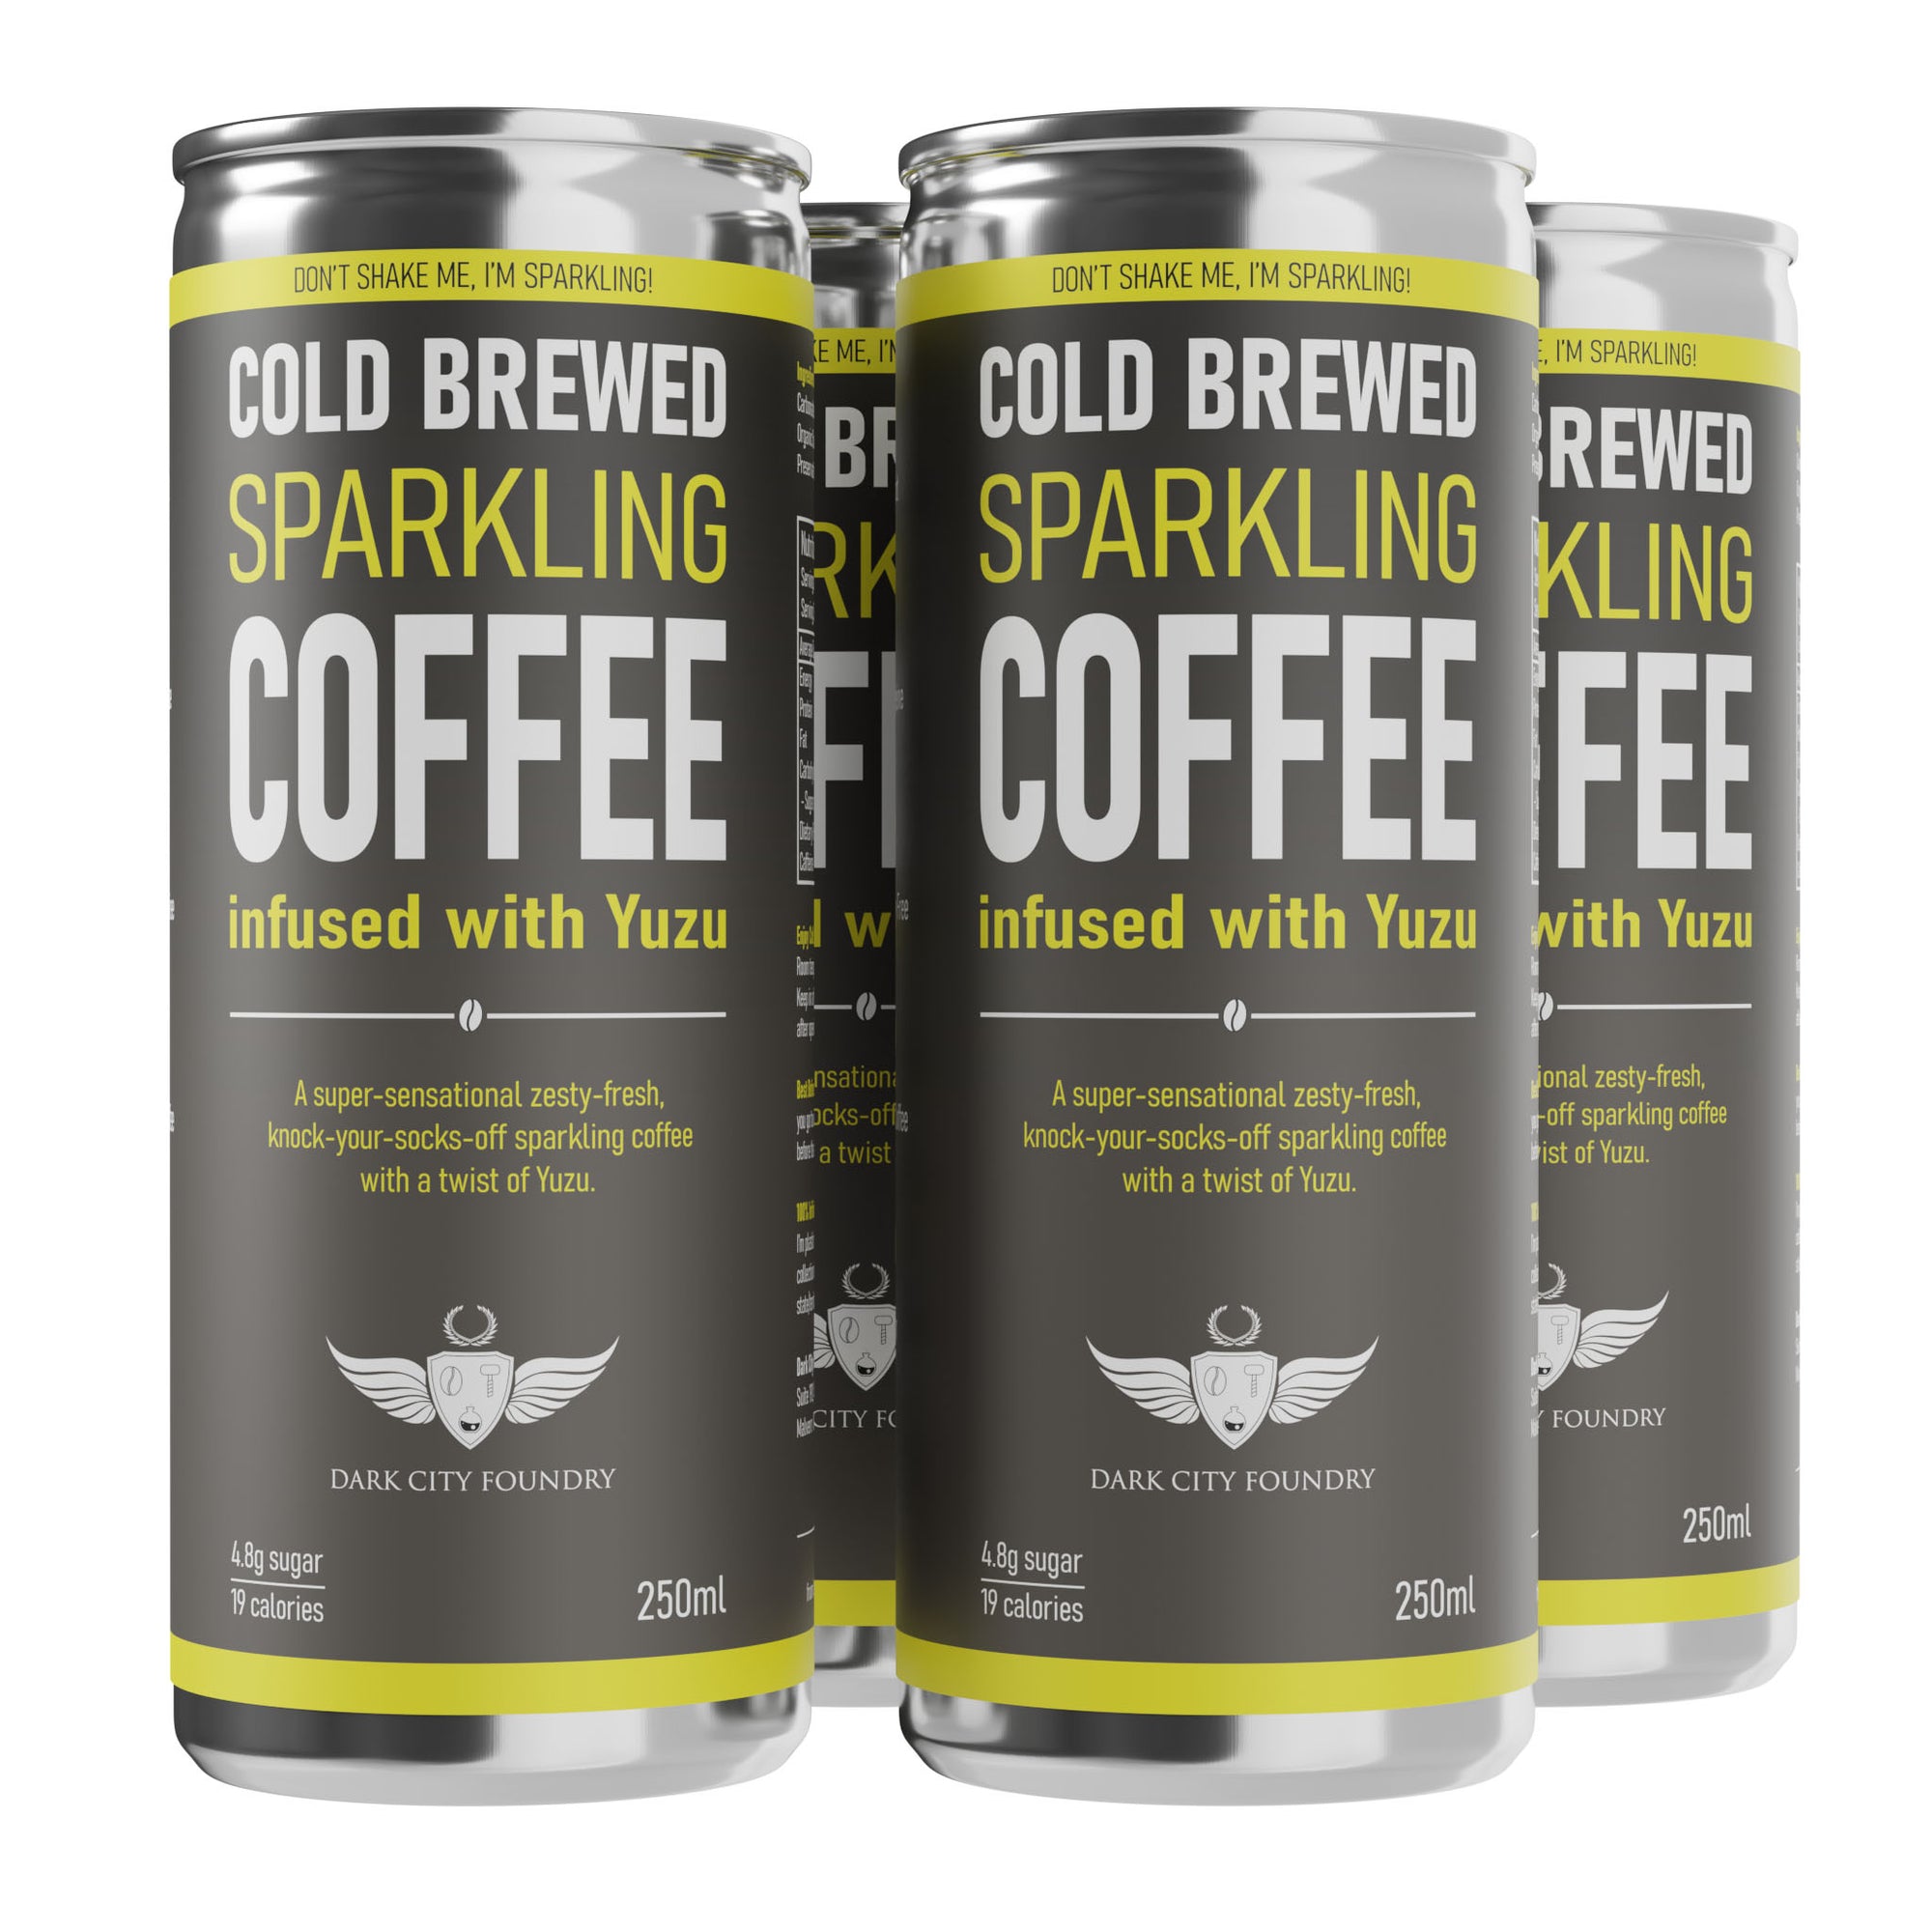 Cold Brew Sparkling Coffee infused with Yuzu